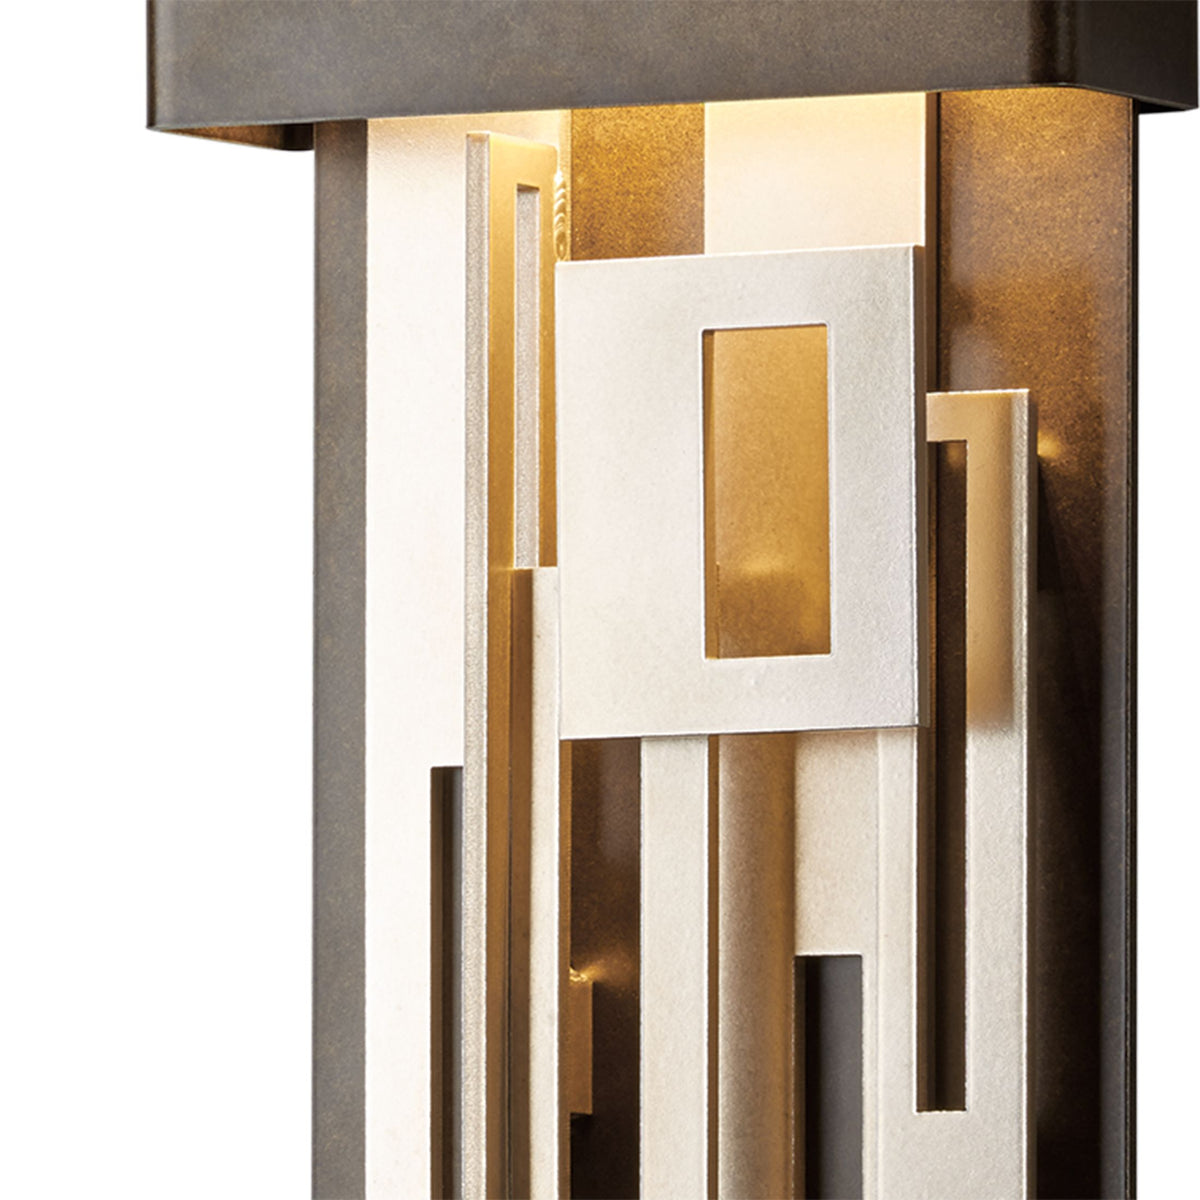 Hubbardton Forge Collage LED Outdoor Wall Sconce